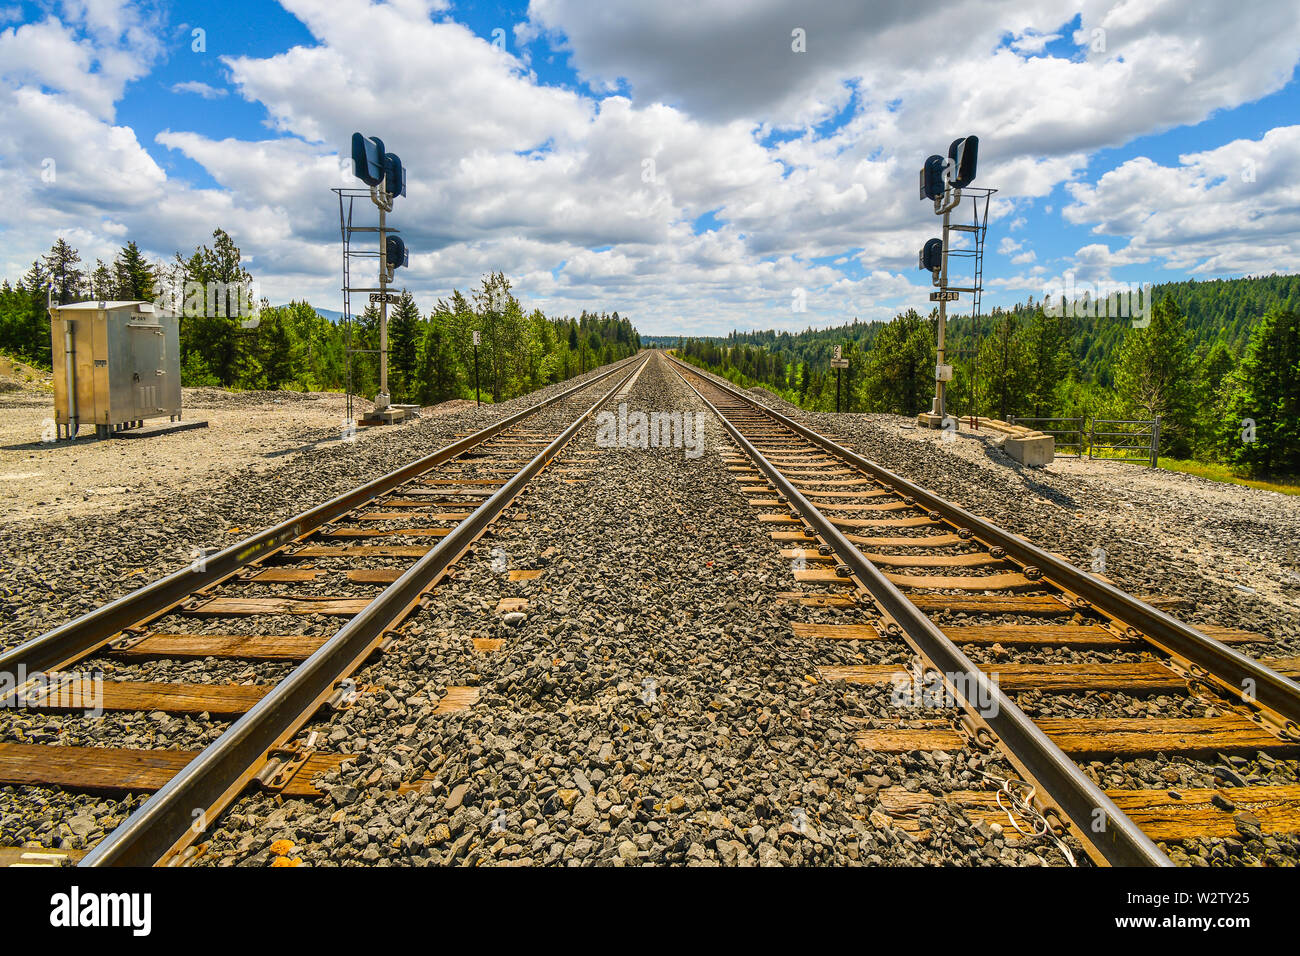 A long straight set of railroad train tracks disappear in the horizon through the mountains in the rural Inland Northwest area of North Idaho. Stock Photo